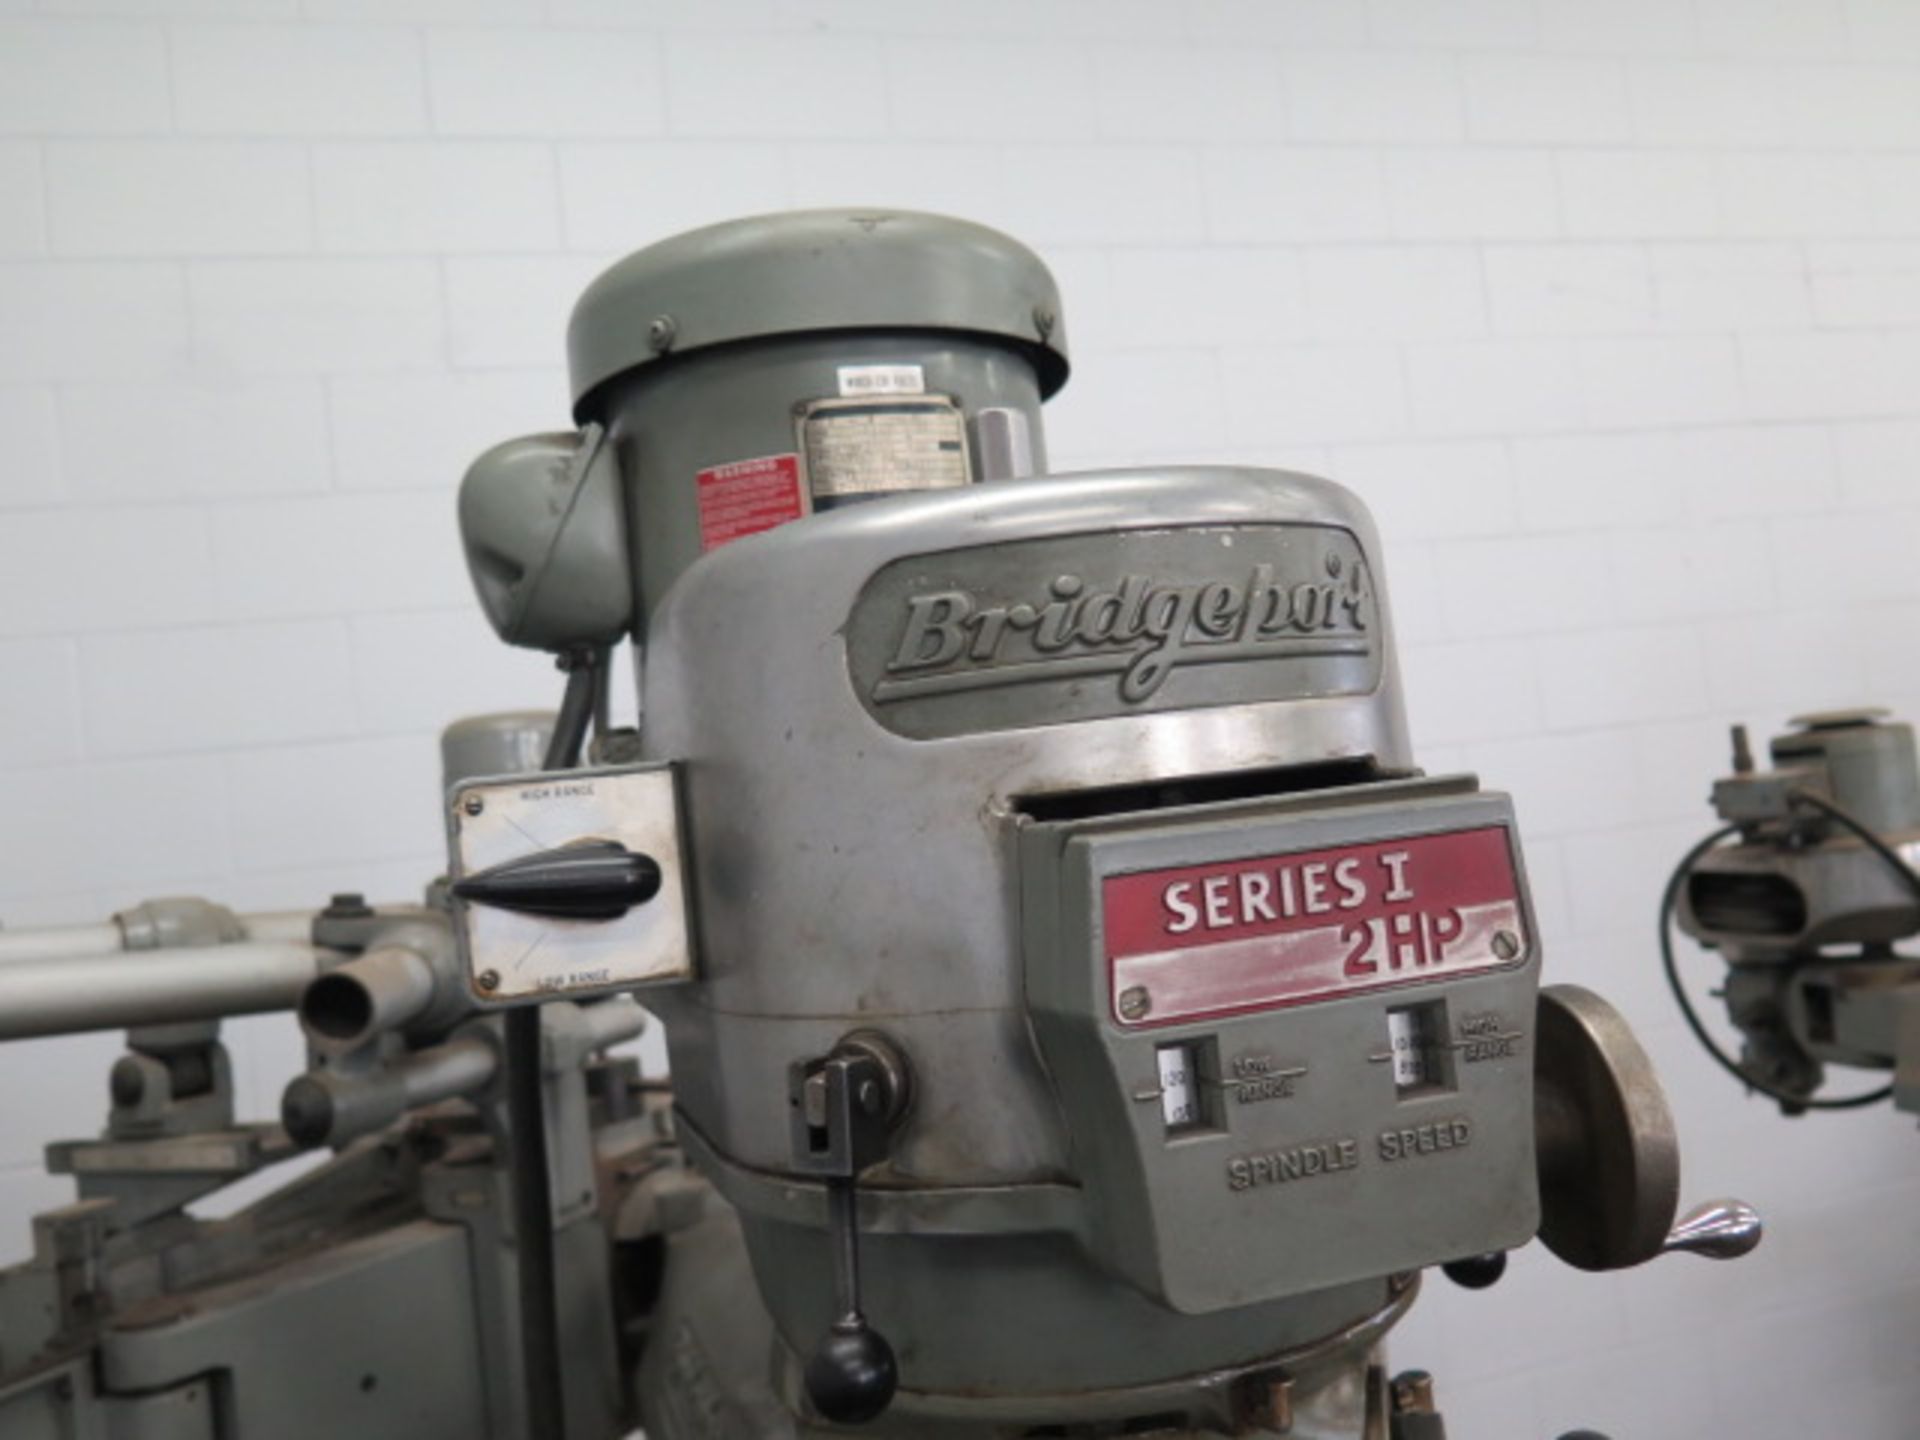 Bridgeport Series 1 - 2Hp Vertical Mill s/n 176483 w/ 60-4200 Dial RPM, 9" x 42" Table, SOLD AS IS - Image 6 of 17